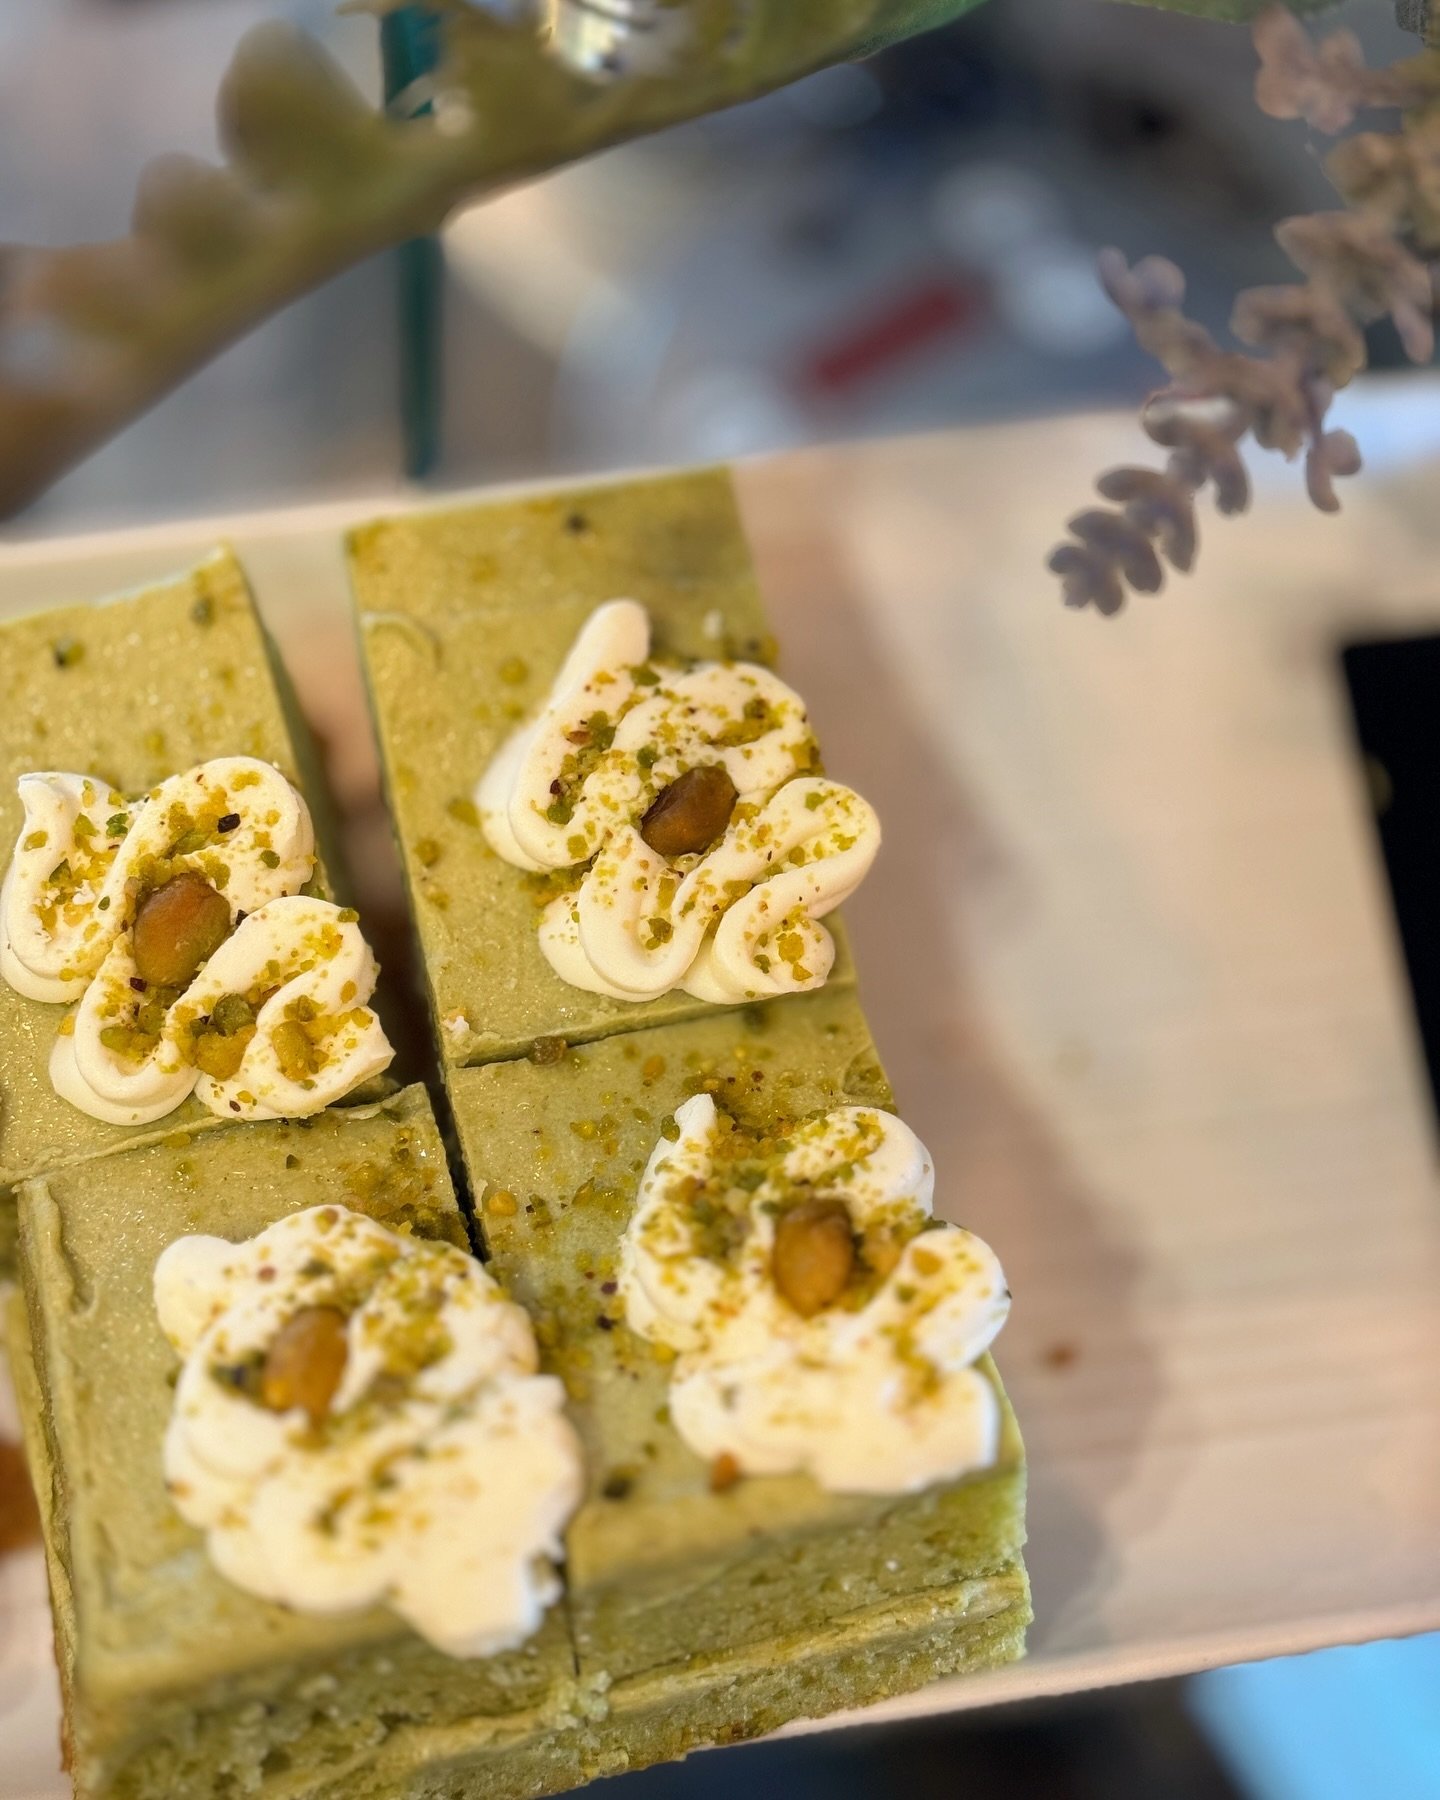 Introducing our newest obsession: The Ultimate Pistachio Cake!💚 Dive into layers of nutty goodness and creamy perfection. 

#pistachio #pistachiocake #dessert #cake #baristadaily #papascaffe #worcestercoffee #papasworcester #visitworcester #worceste